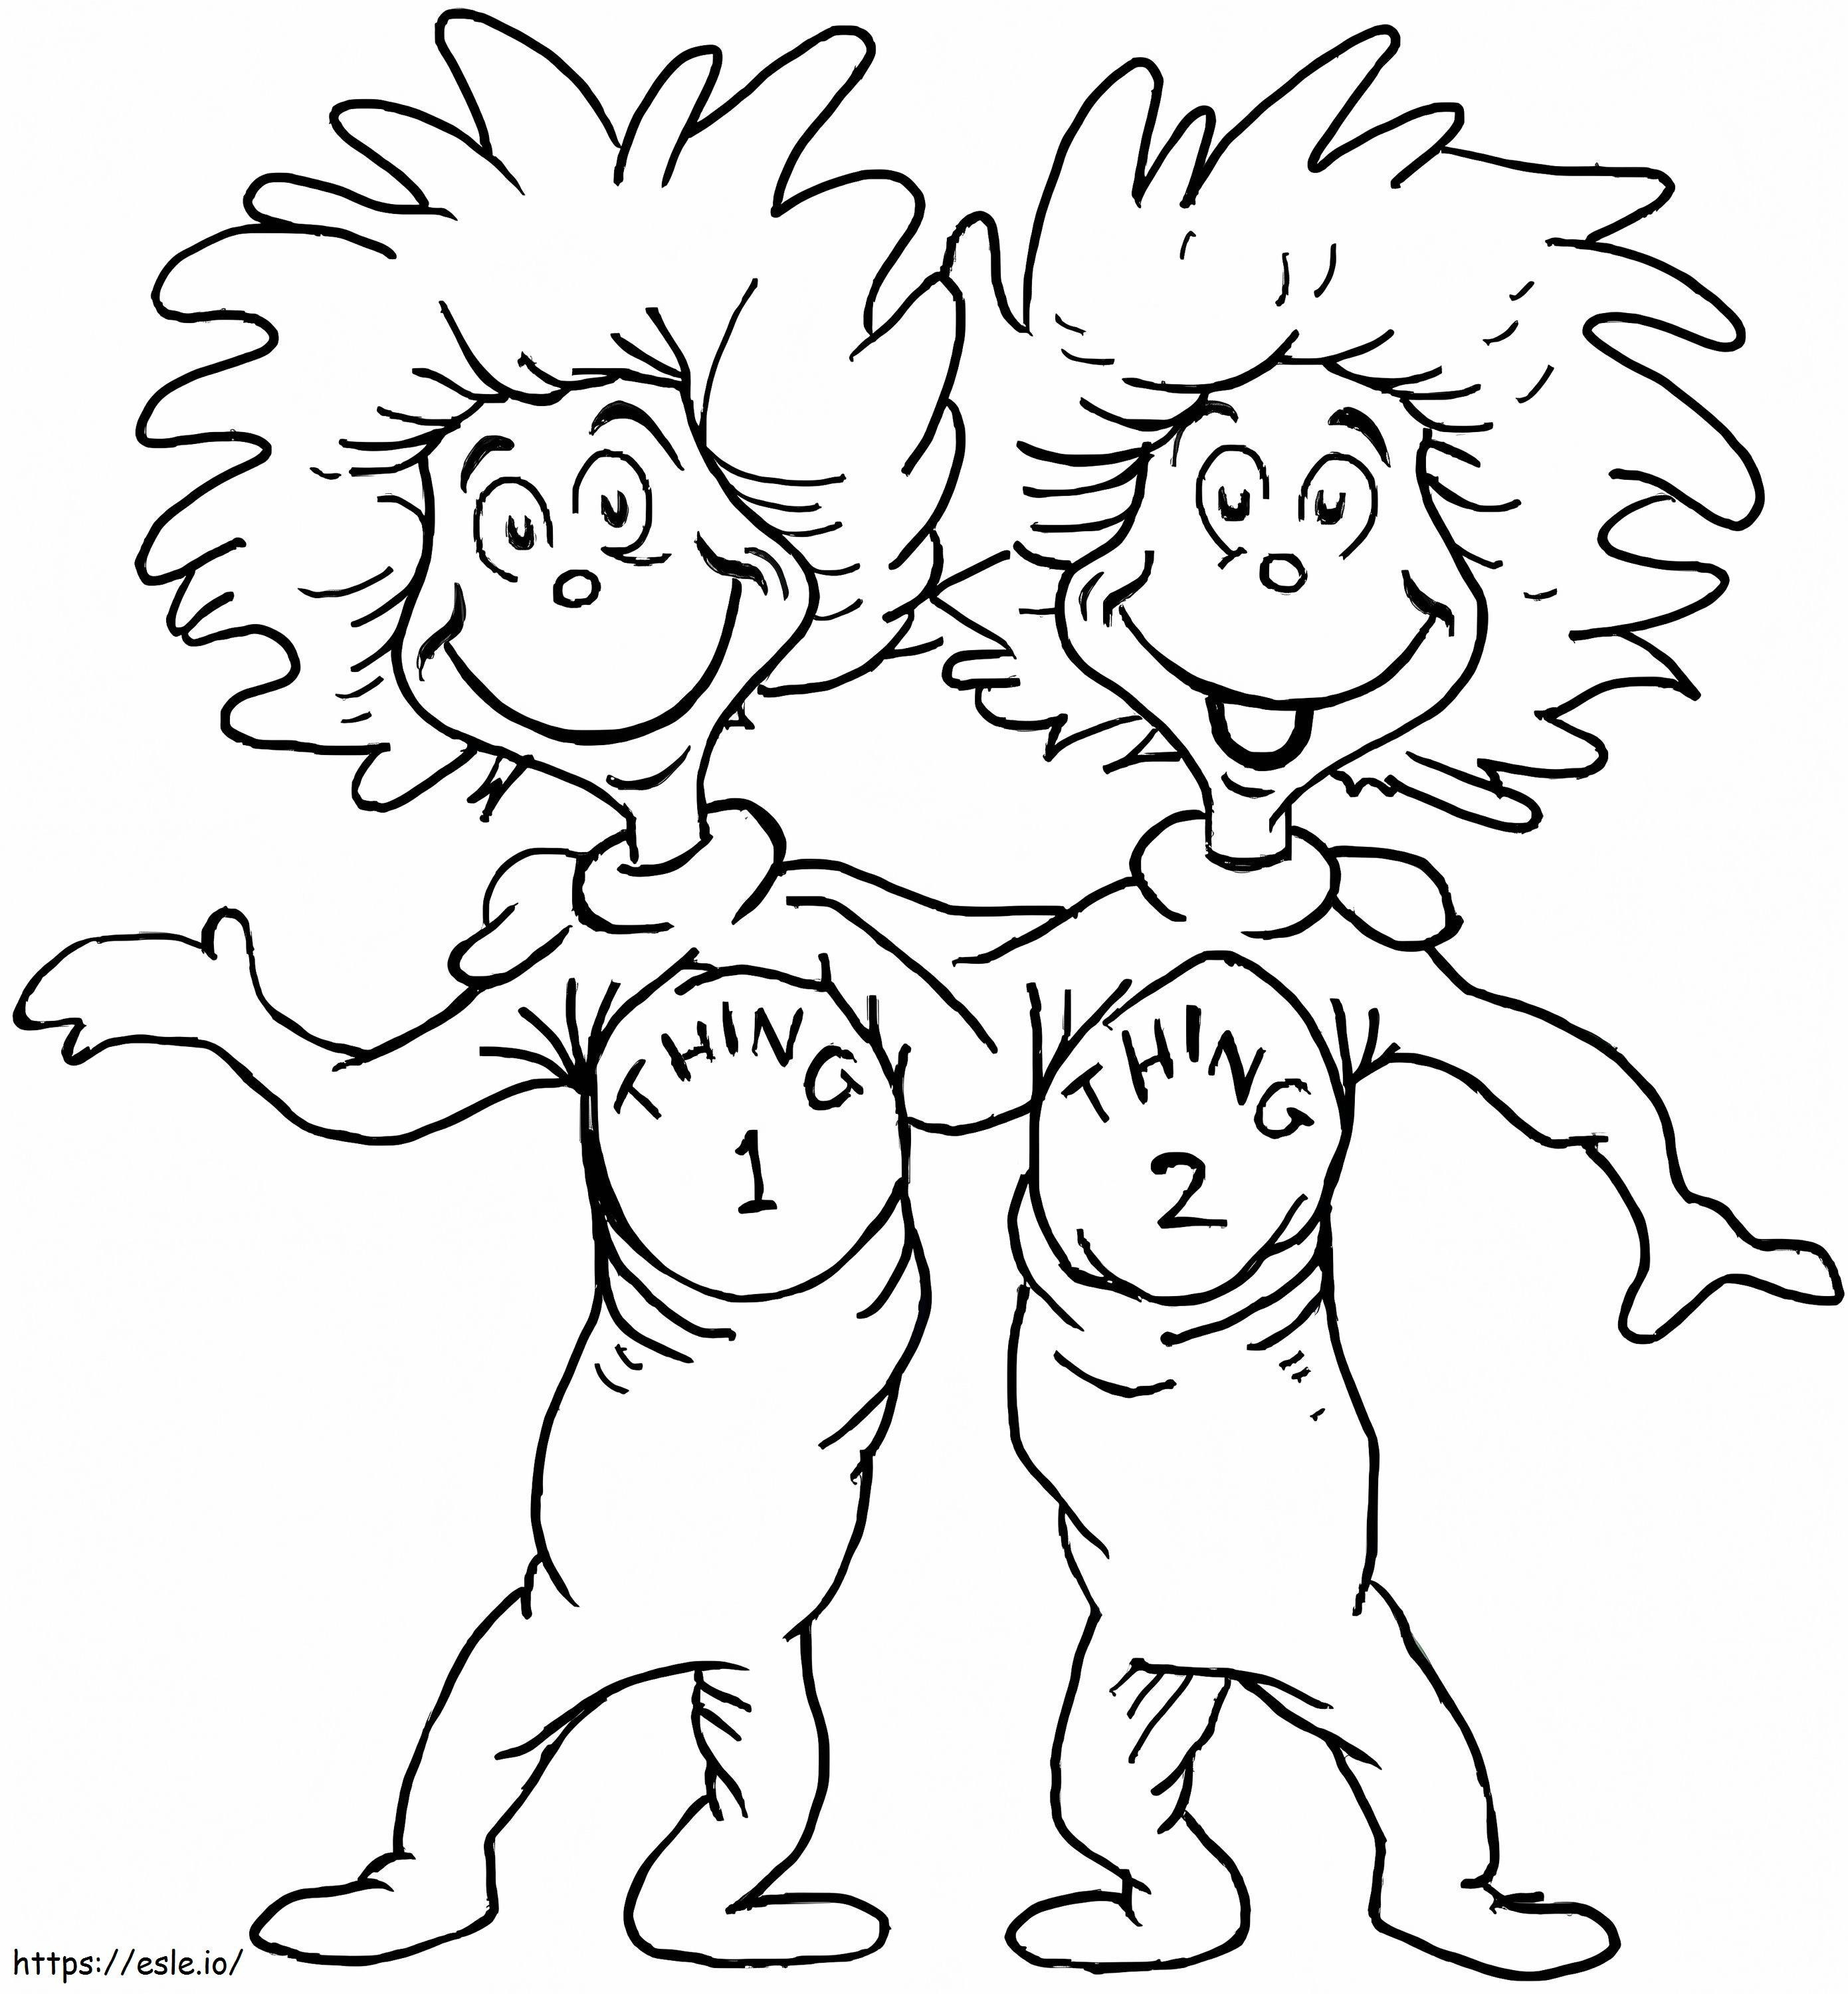 1580719663 Dr Seuss Cat In The Hat Free Sheets For Kids coloring page